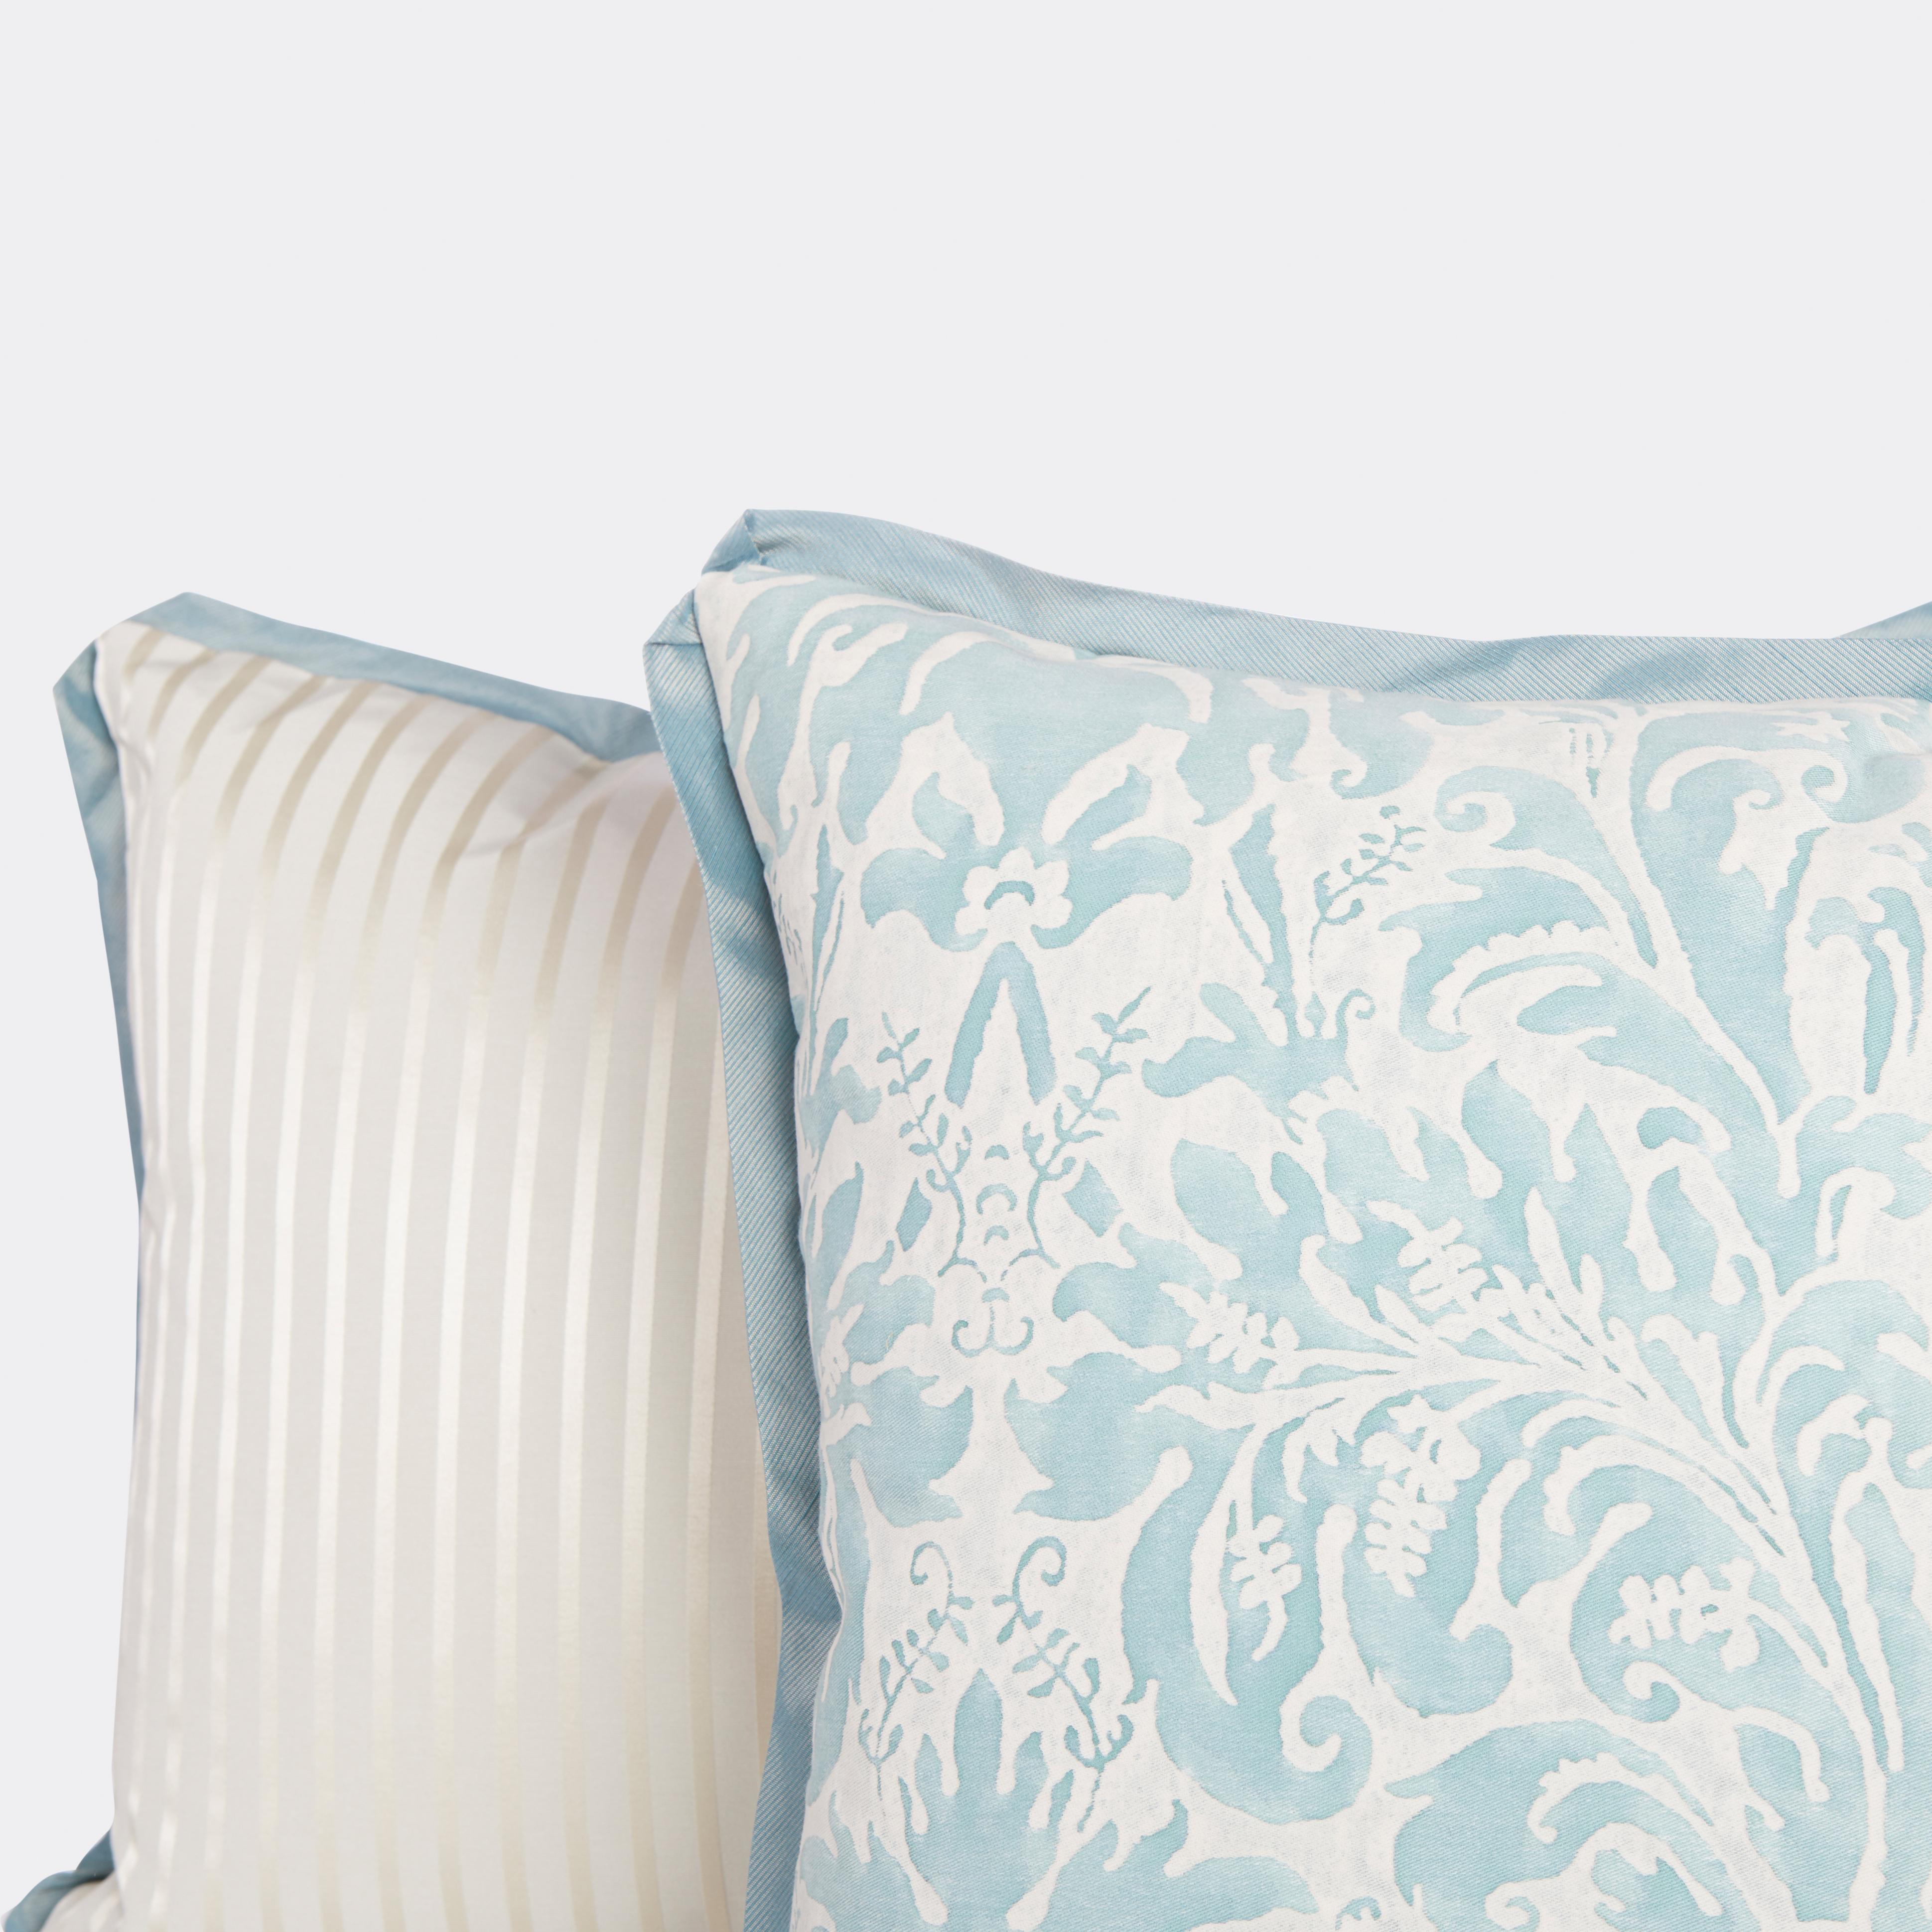 Contemporary Pair of Fortuny Sevigne Cushions in French Blue and Antique White David Duncan